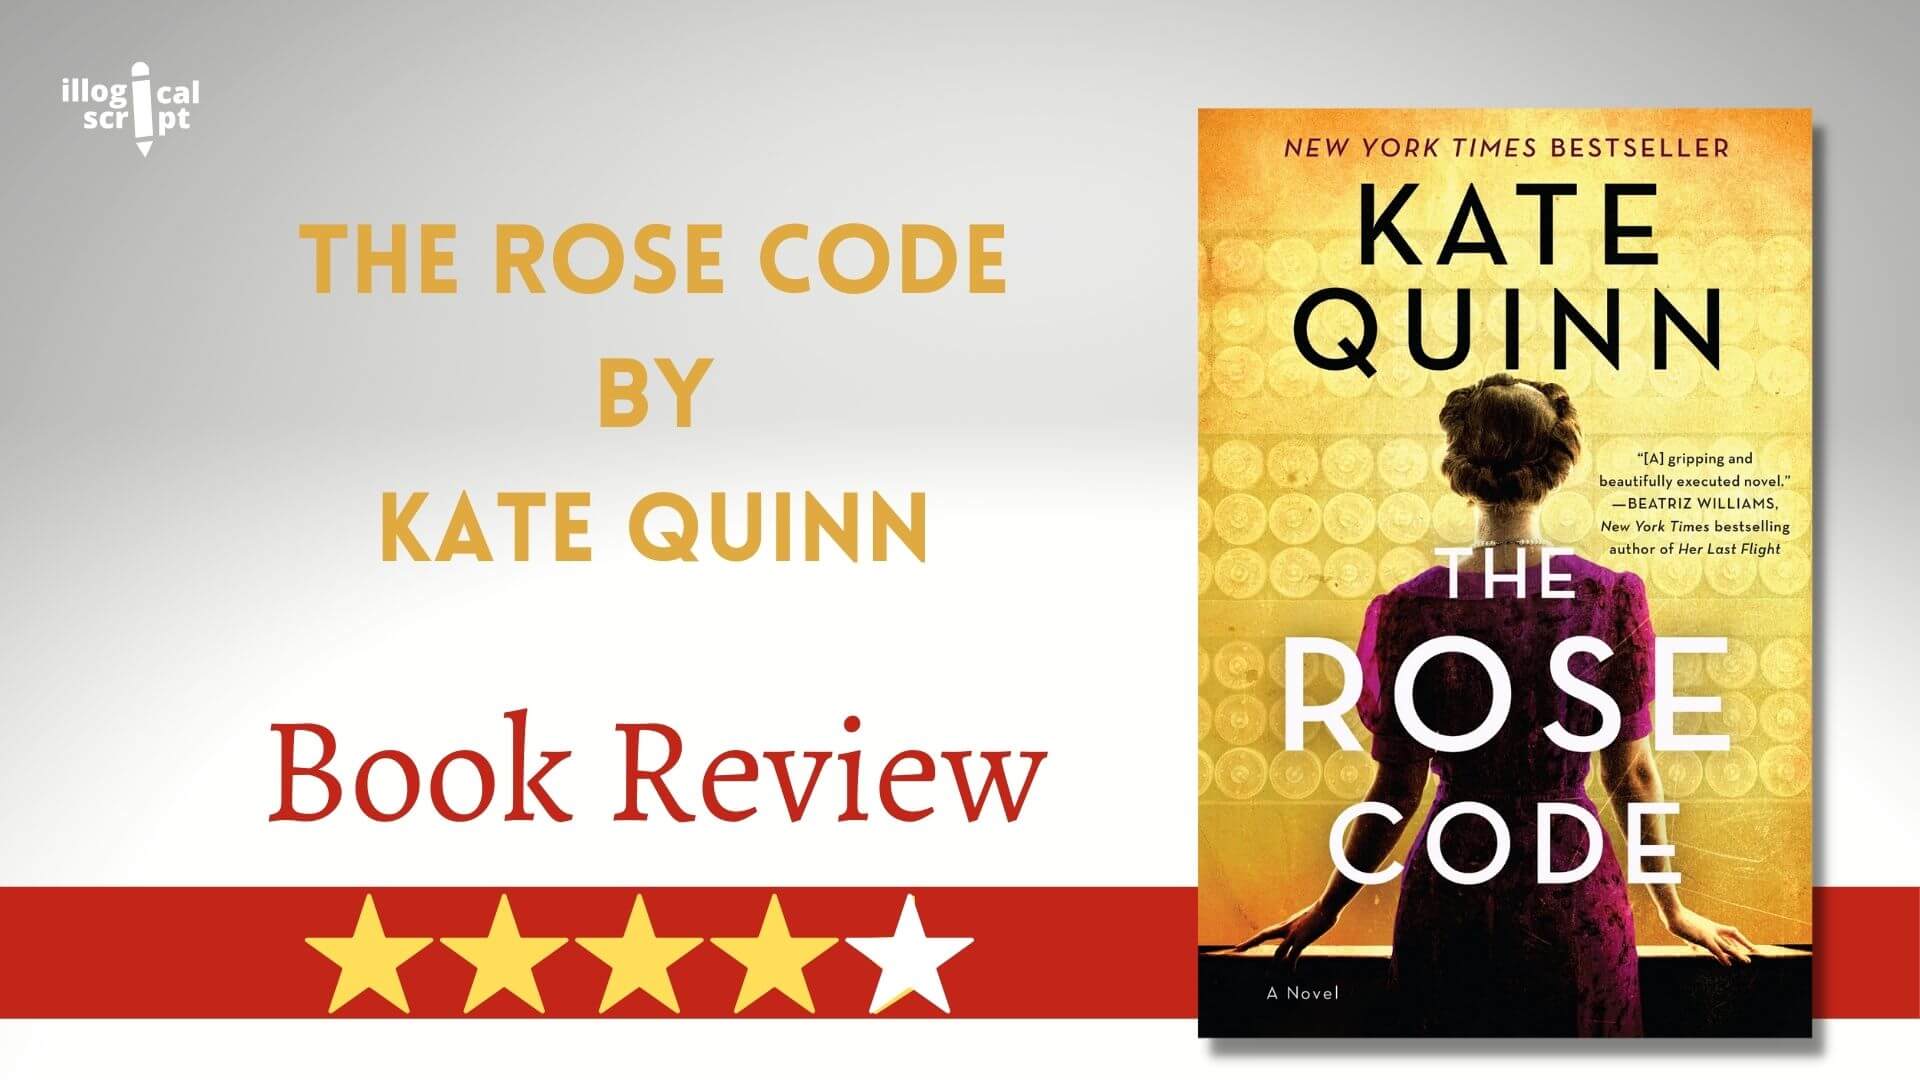 Book Review: The Rose Code by Kate Quinn